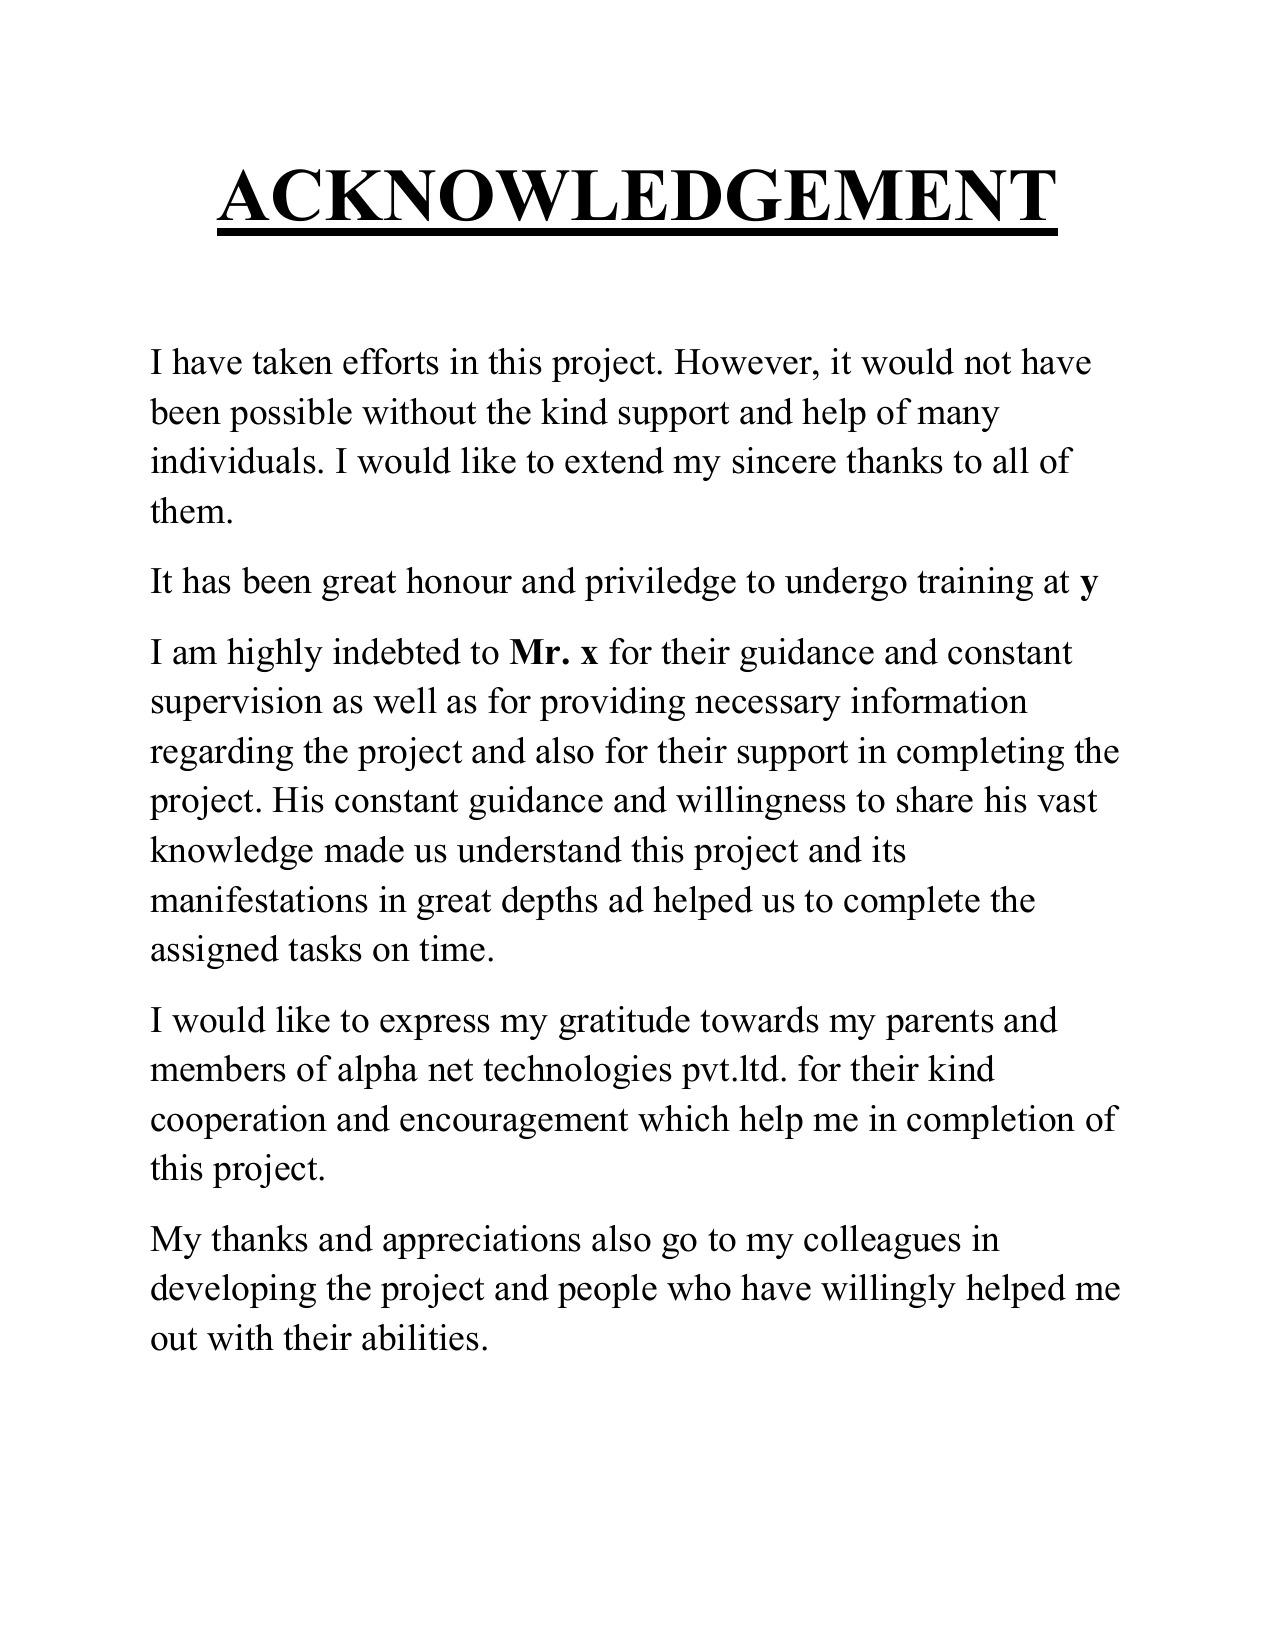 thesis acknowledgement sample doc